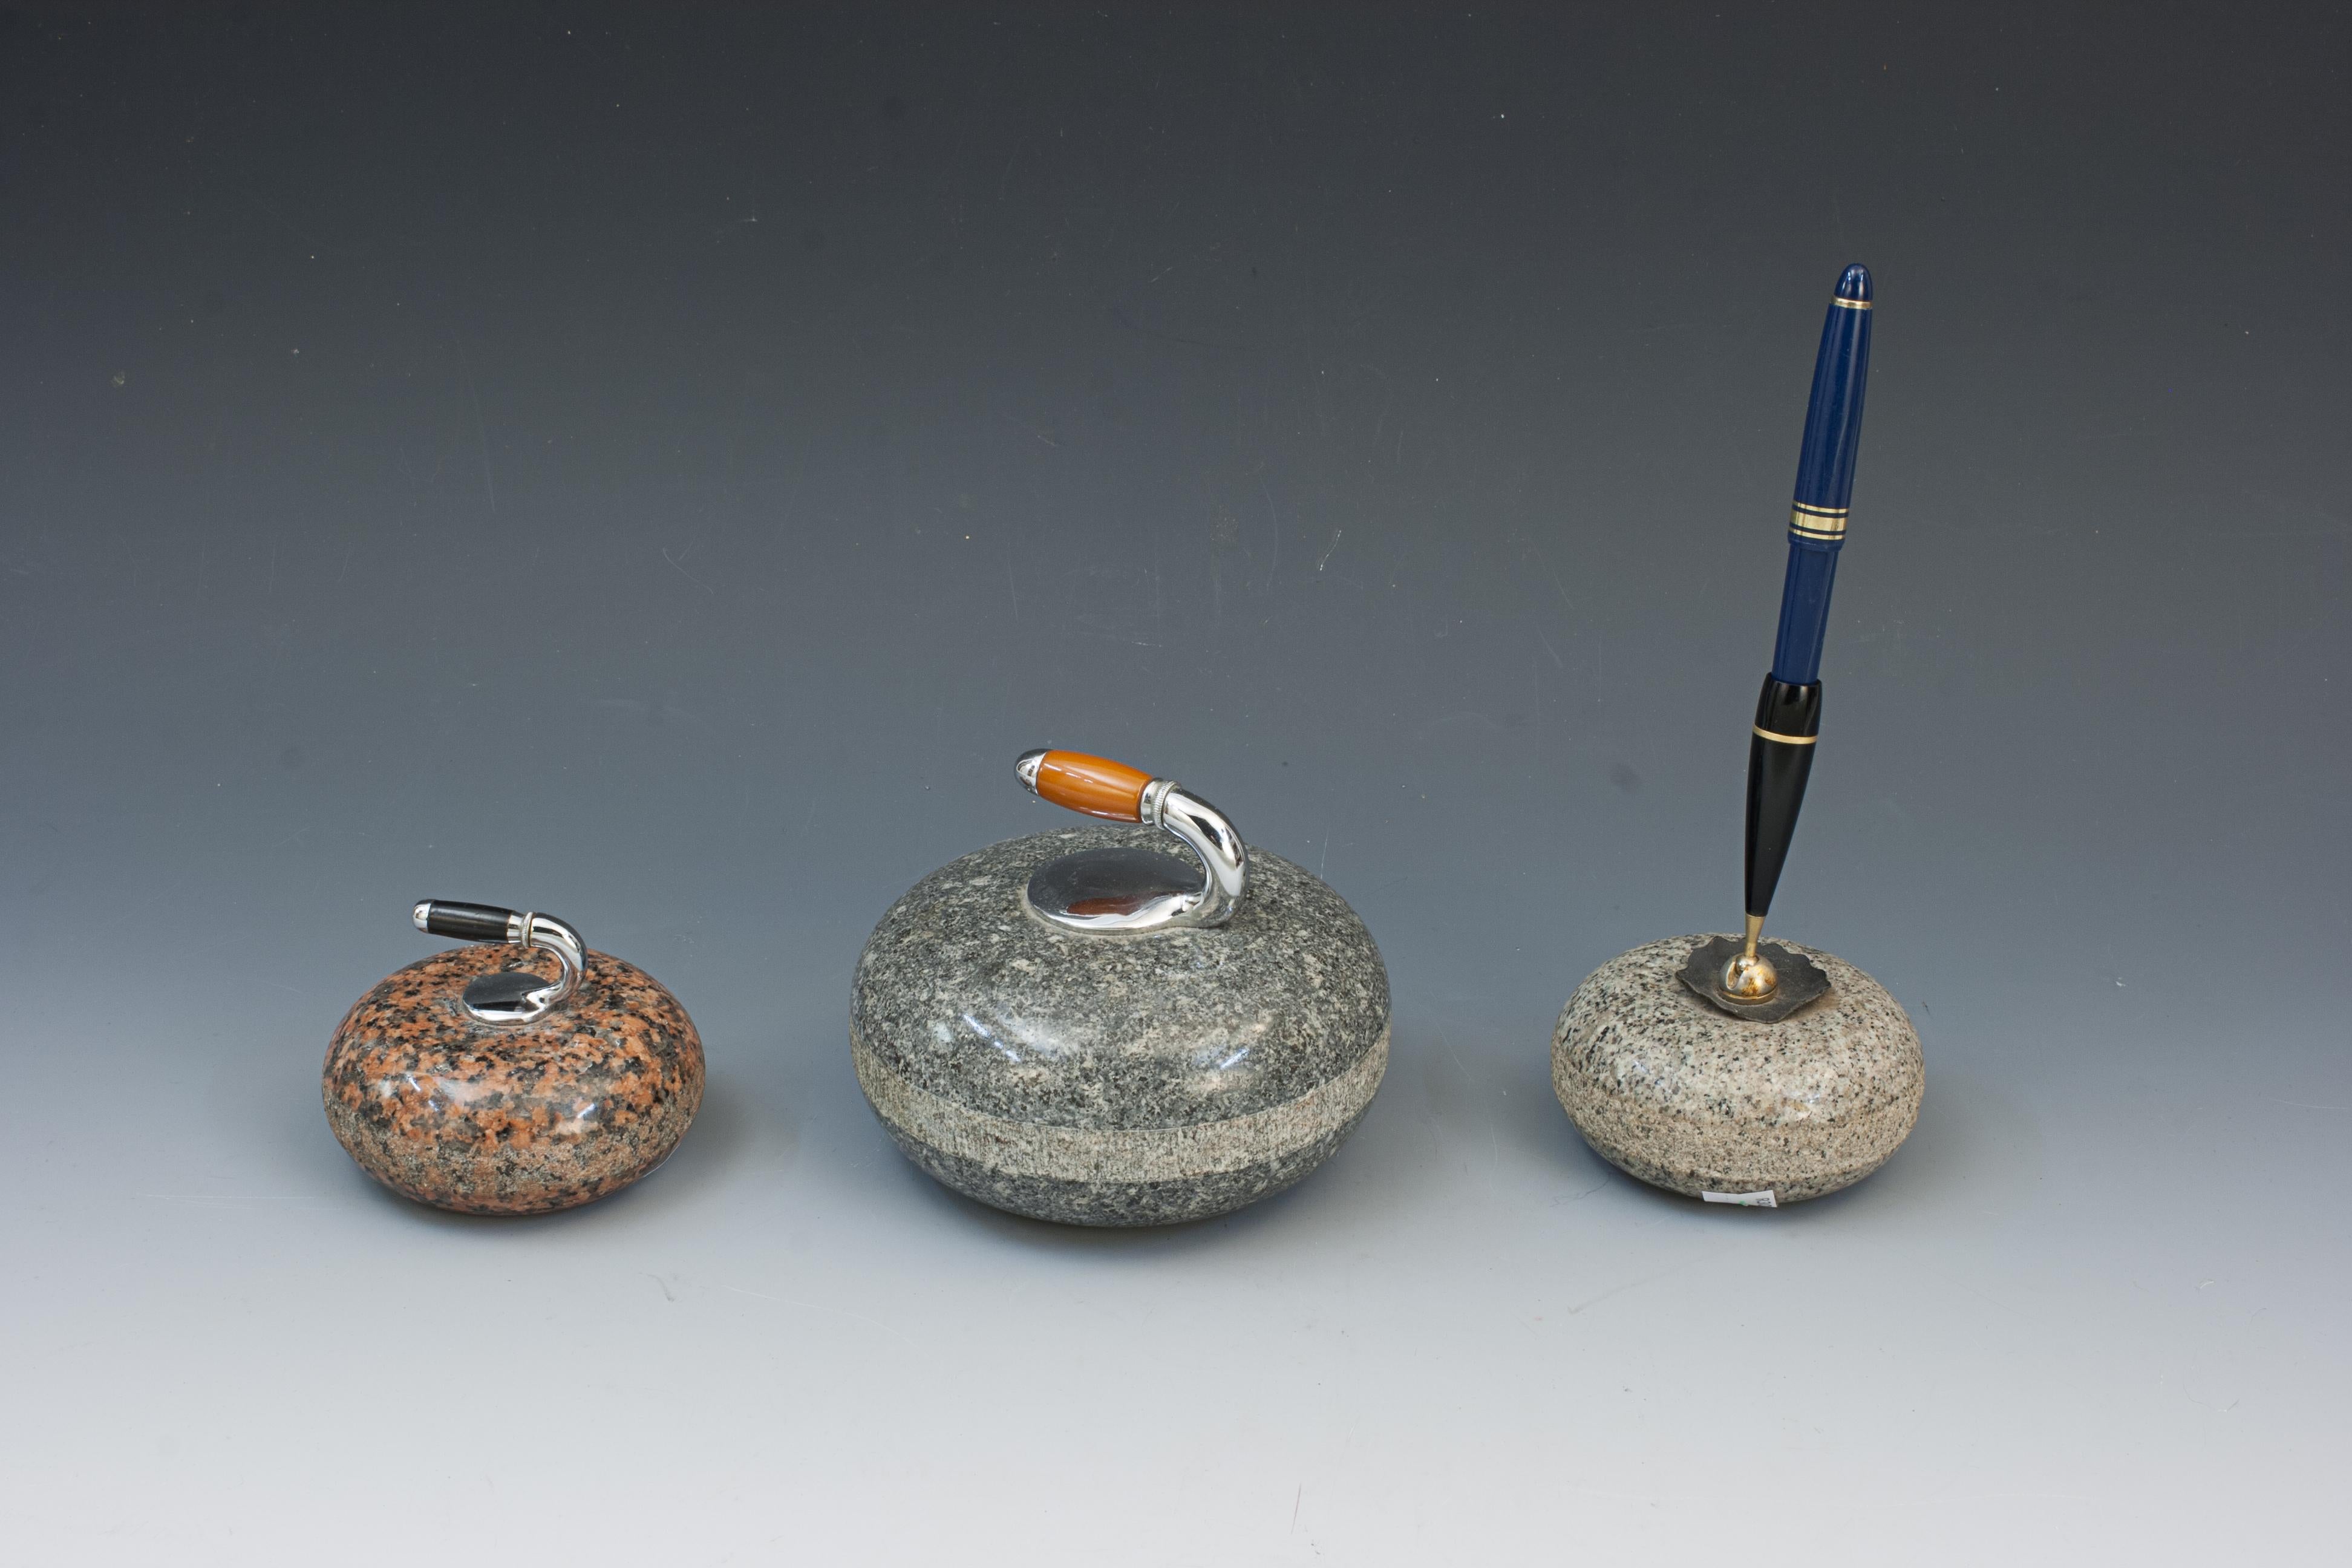 Three Piece Curling Desk Set.
A nice collection of three miniature desk top granite curling stones. Two are paperweights complete with handles and the third is a pen holder. A great little set for the curling enthusiast.

Size shown is for the